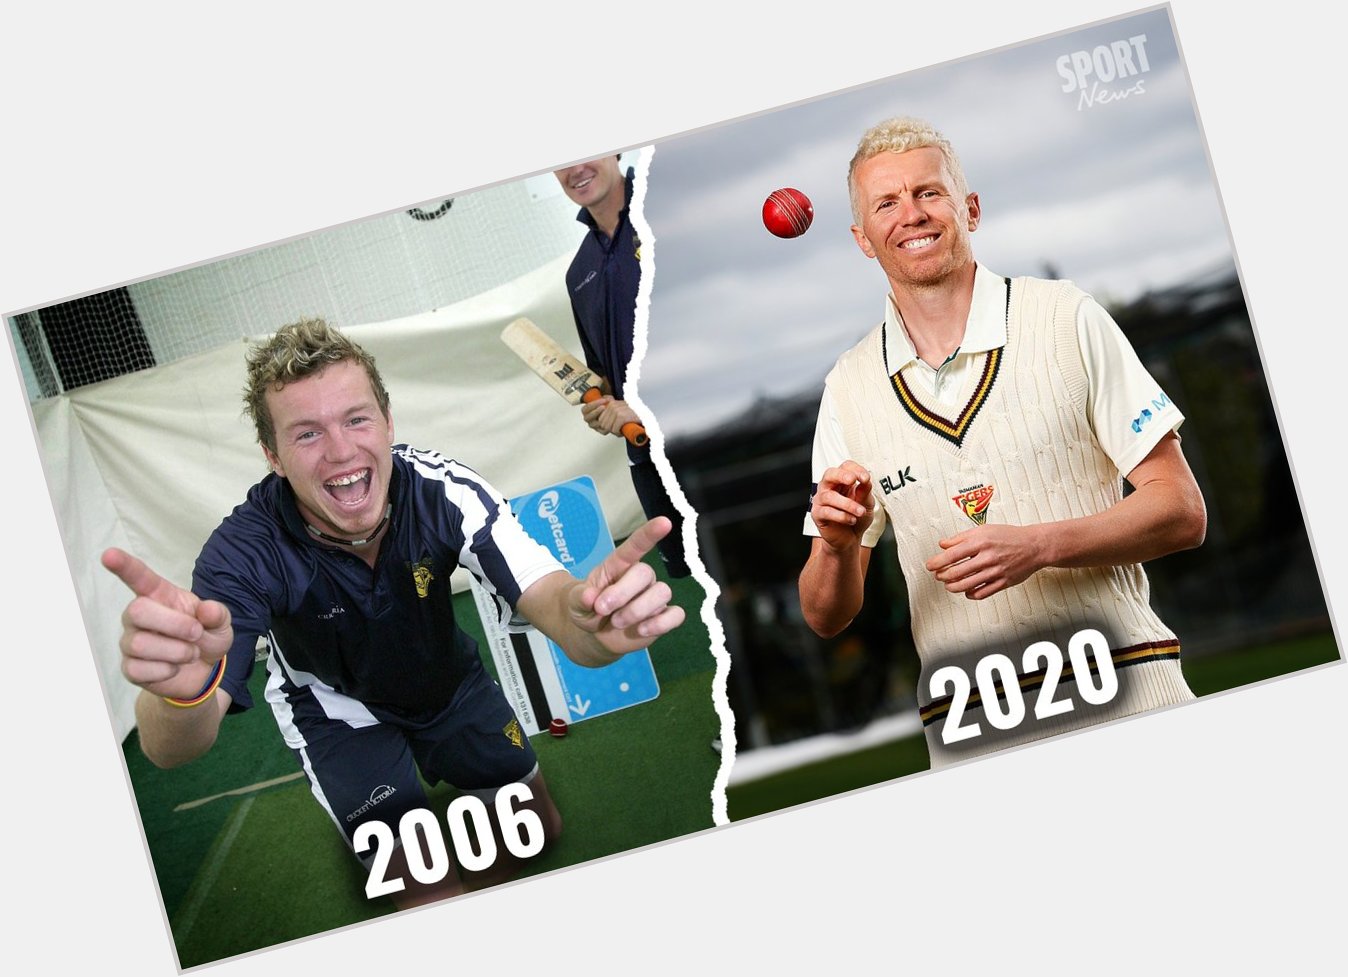 He may play for Tasmania now, but he\ll always be a great Victorian.

Happy birthday Peter Siddle! 